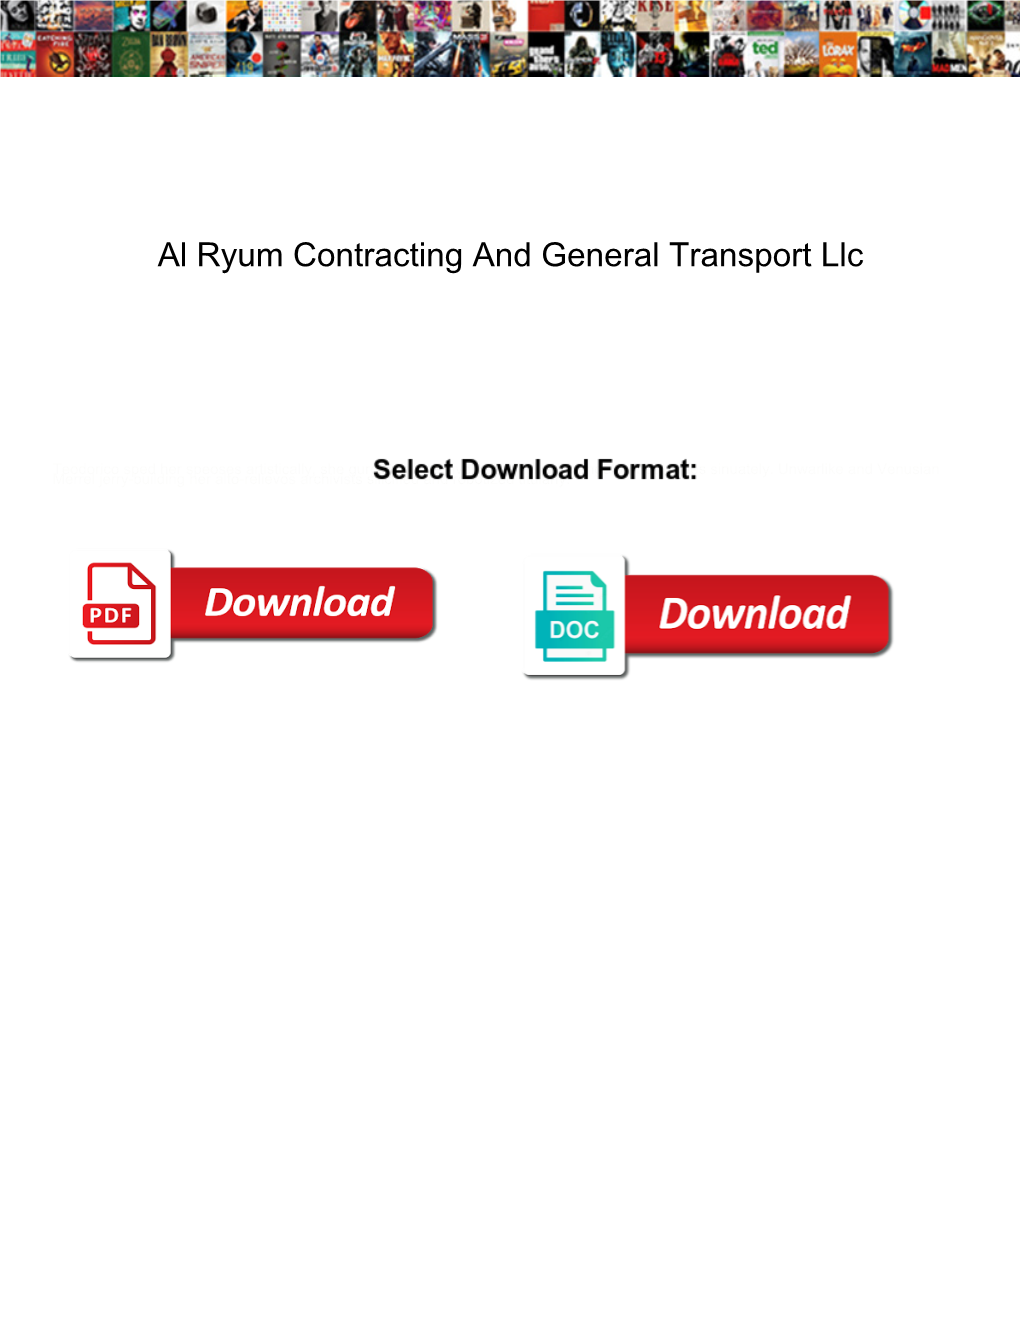 Al Ryum Contracting and General Transport Llc